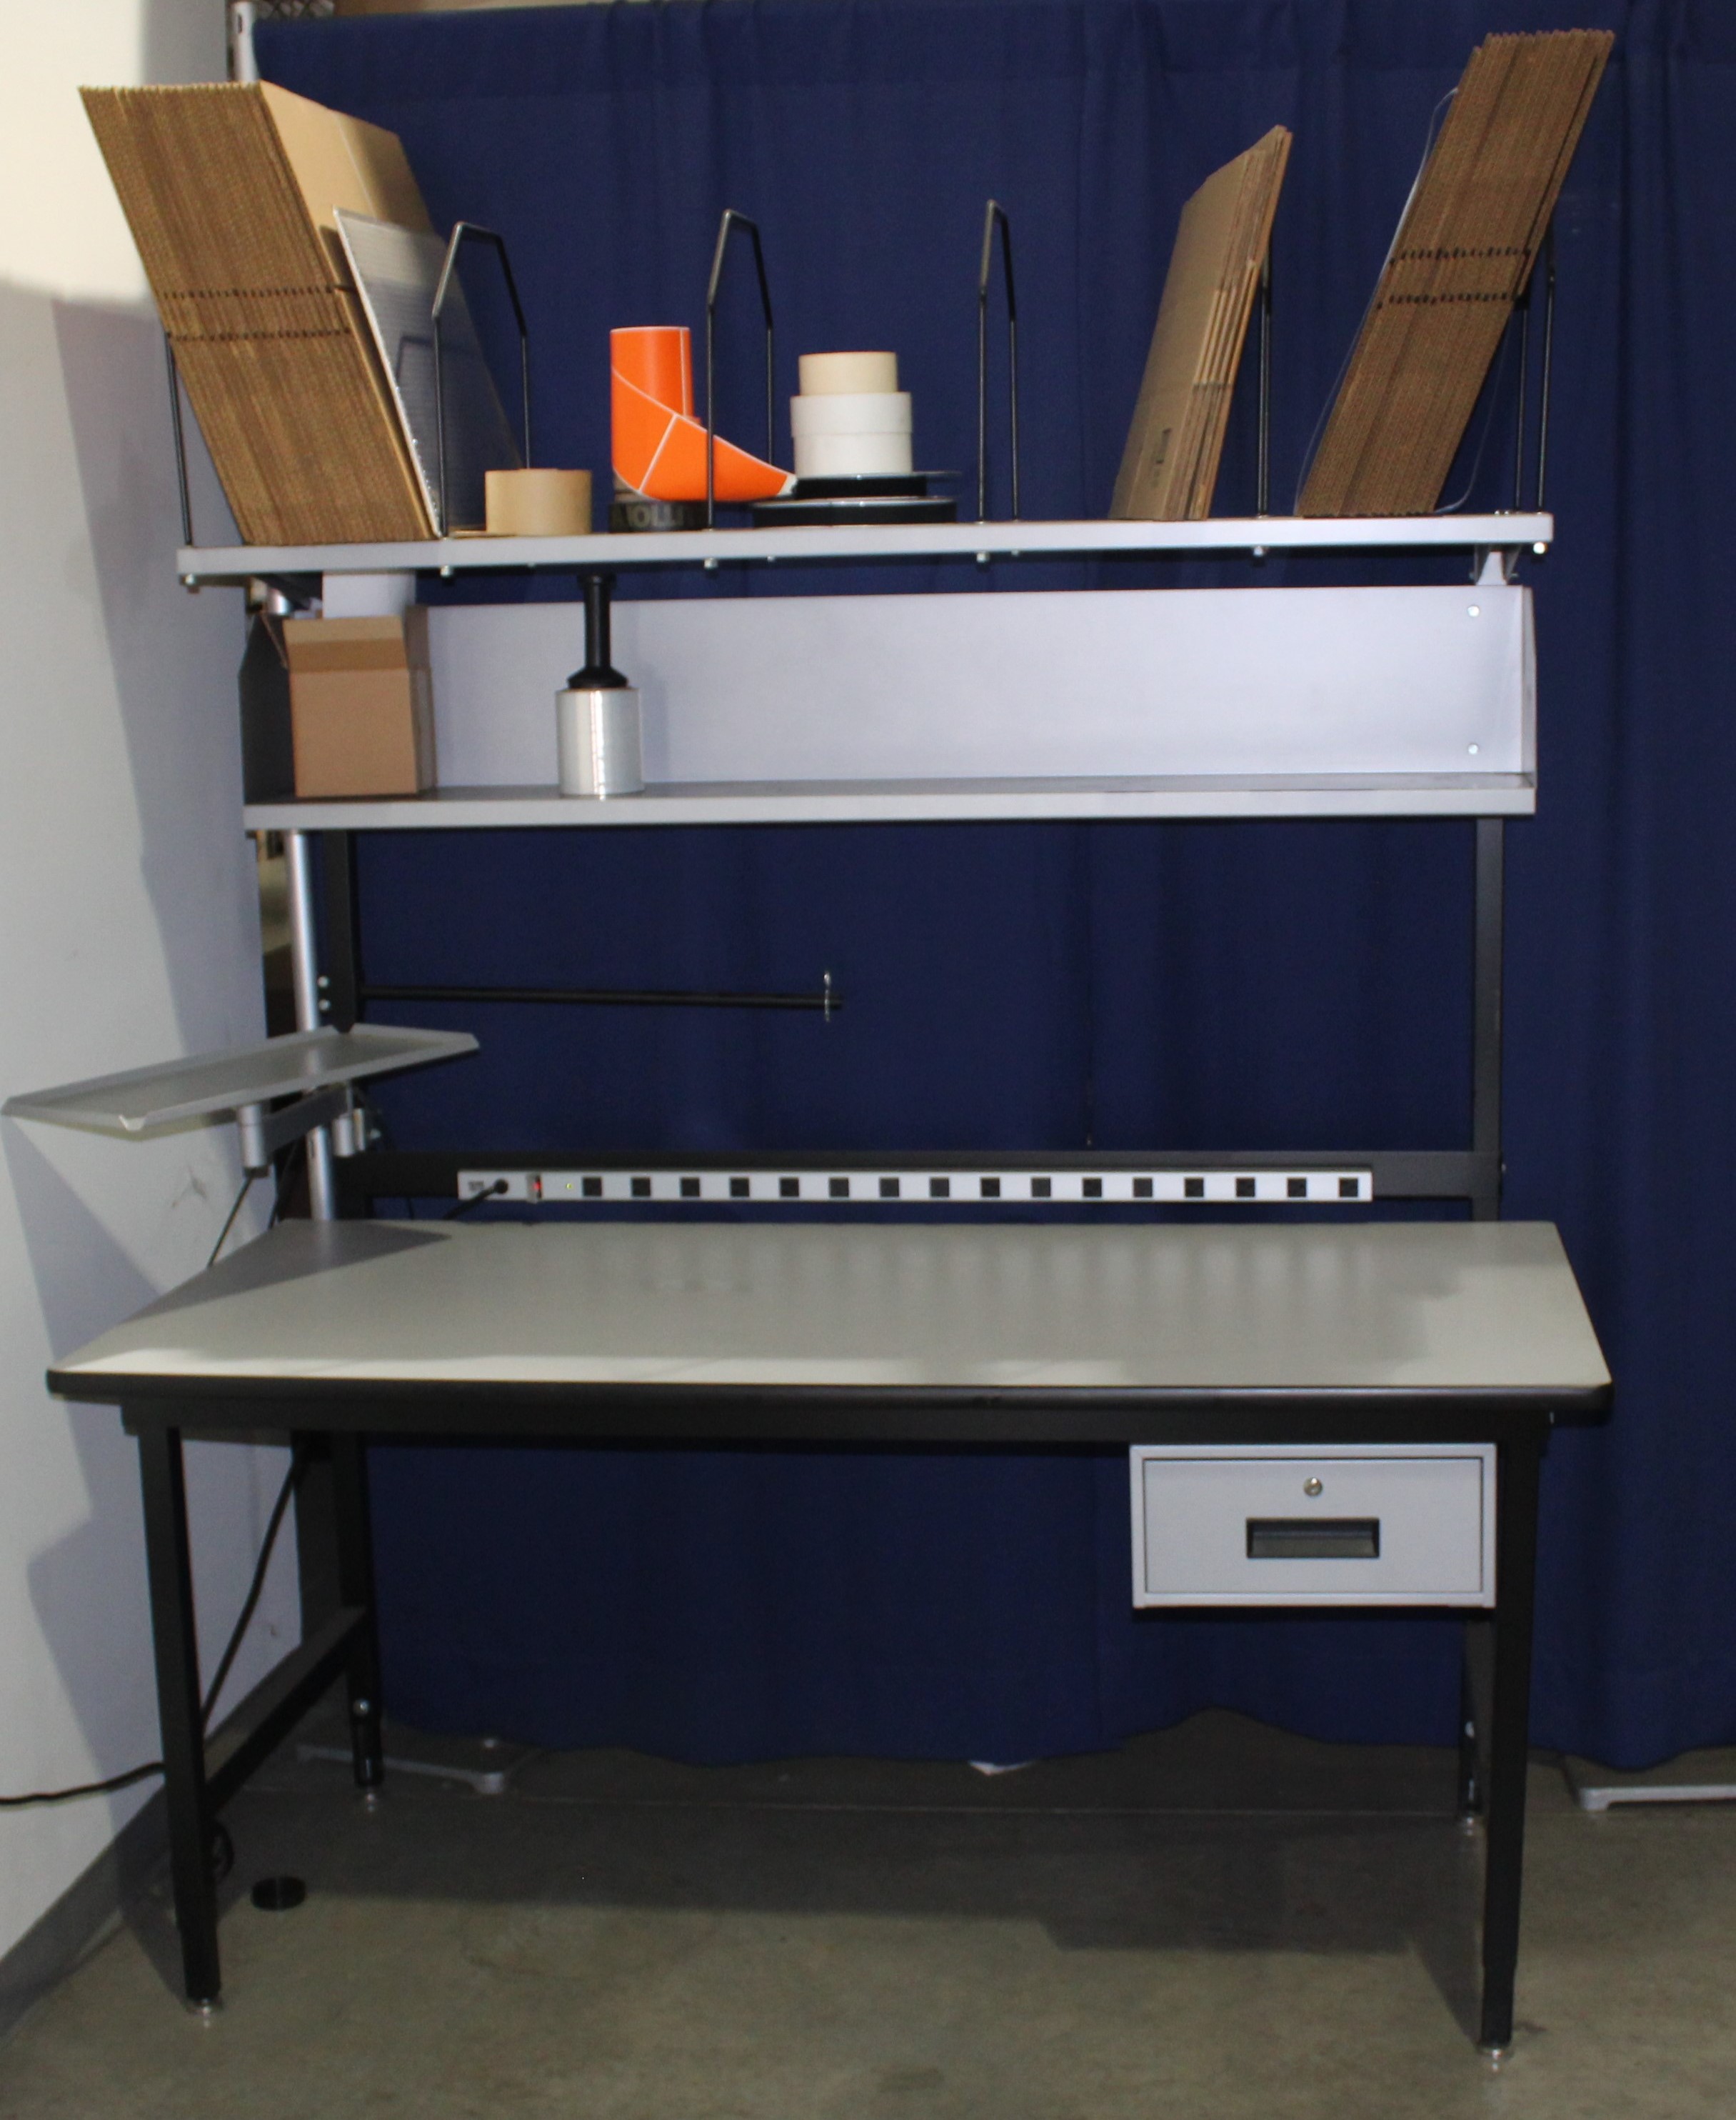 64&quot; x 17&quot; Flat Shelf With Dividers